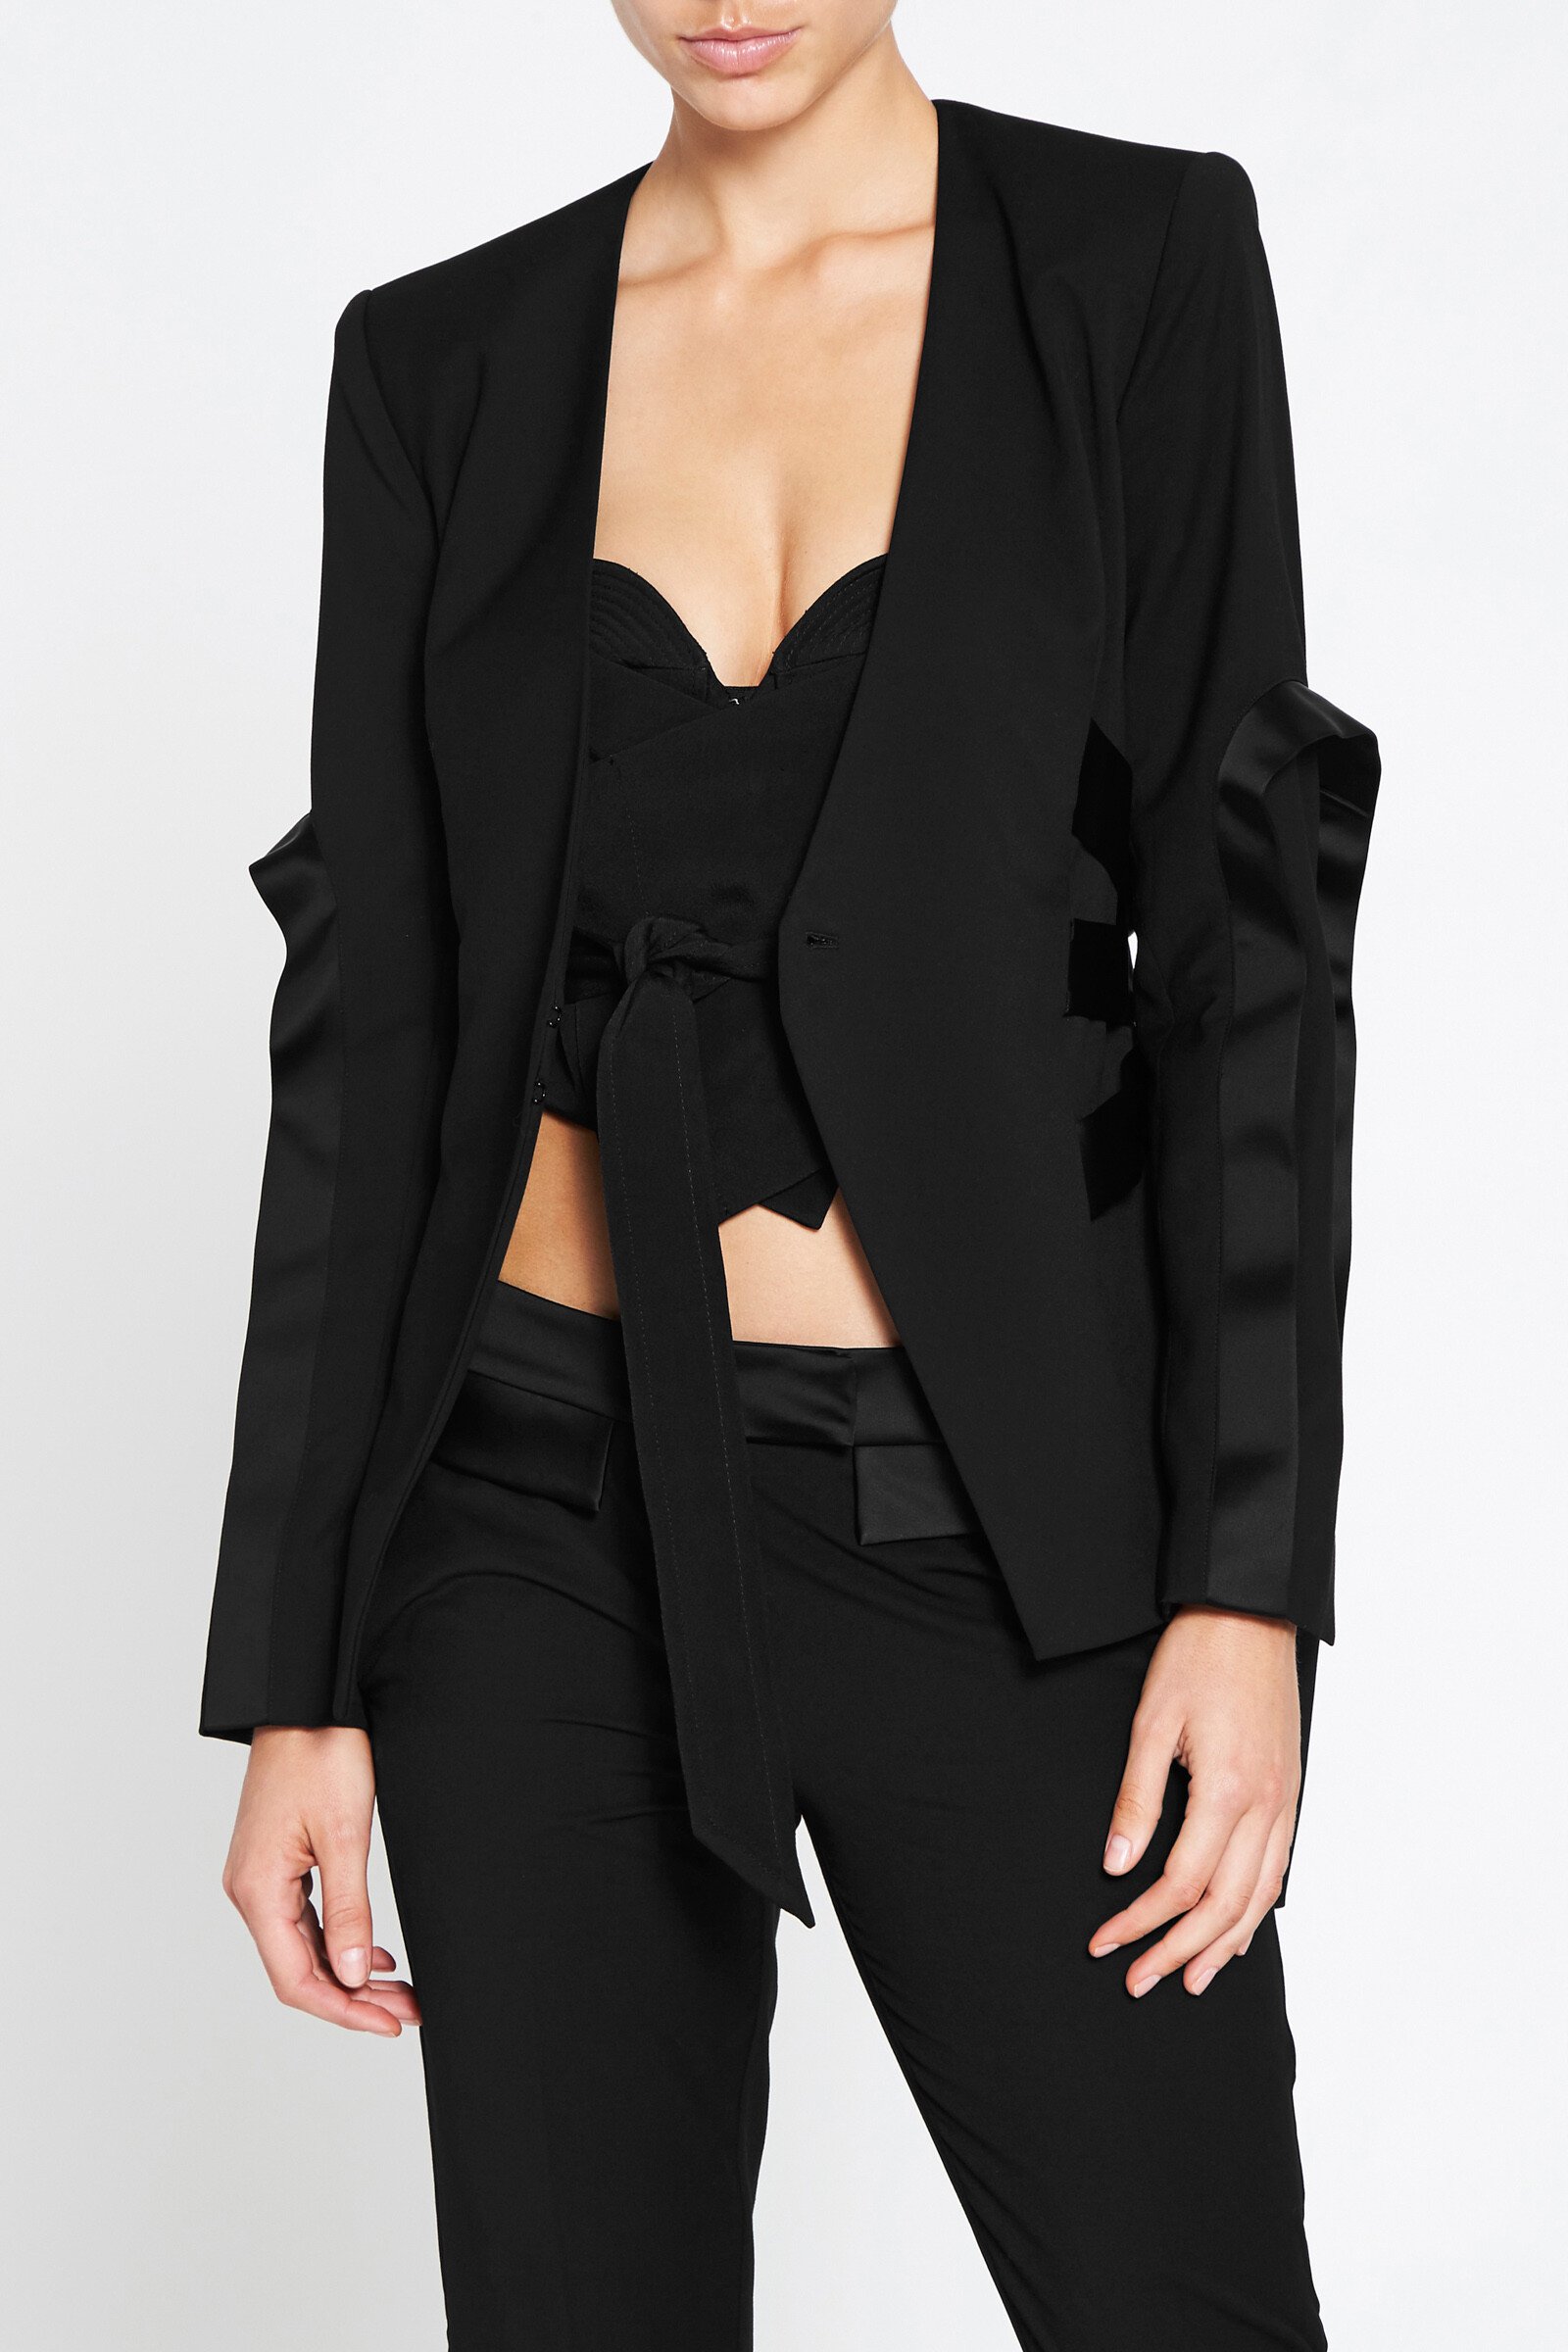 THE STING JACKET- SASS & BIDE SPRING 17 Boxing Day Sale